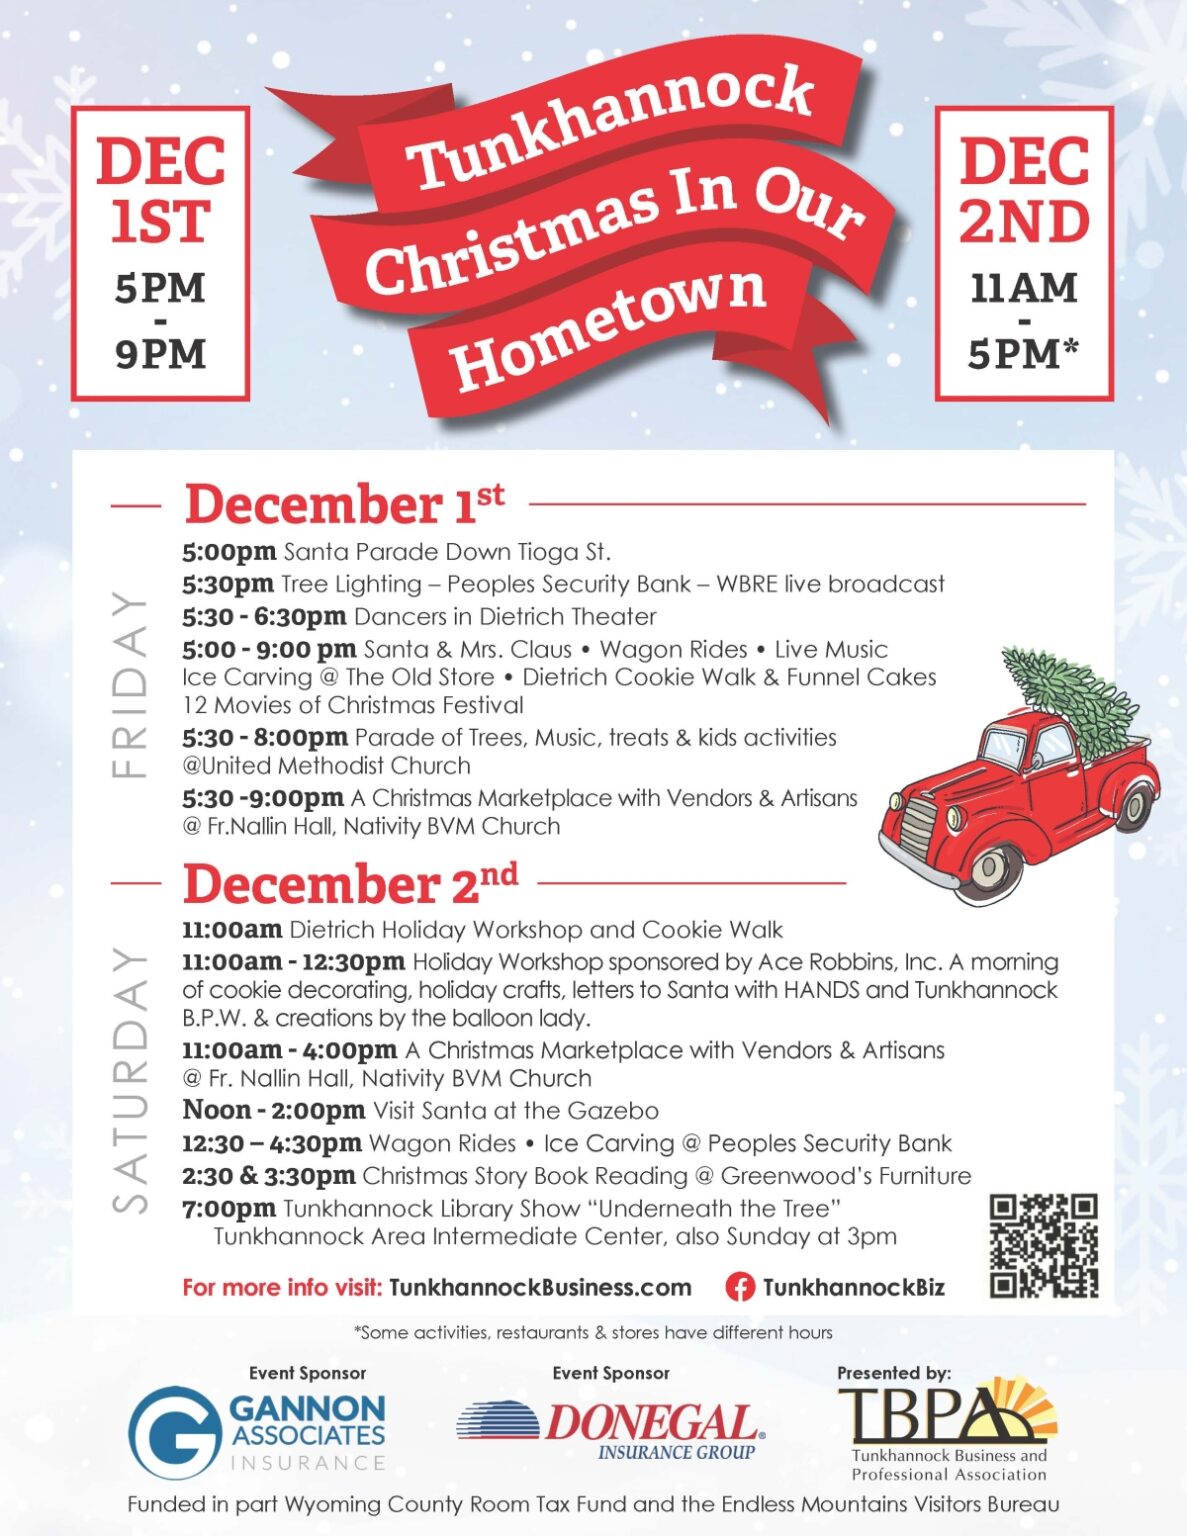 Christmas In Our Hometown Tunkhannock Business & Professional Association